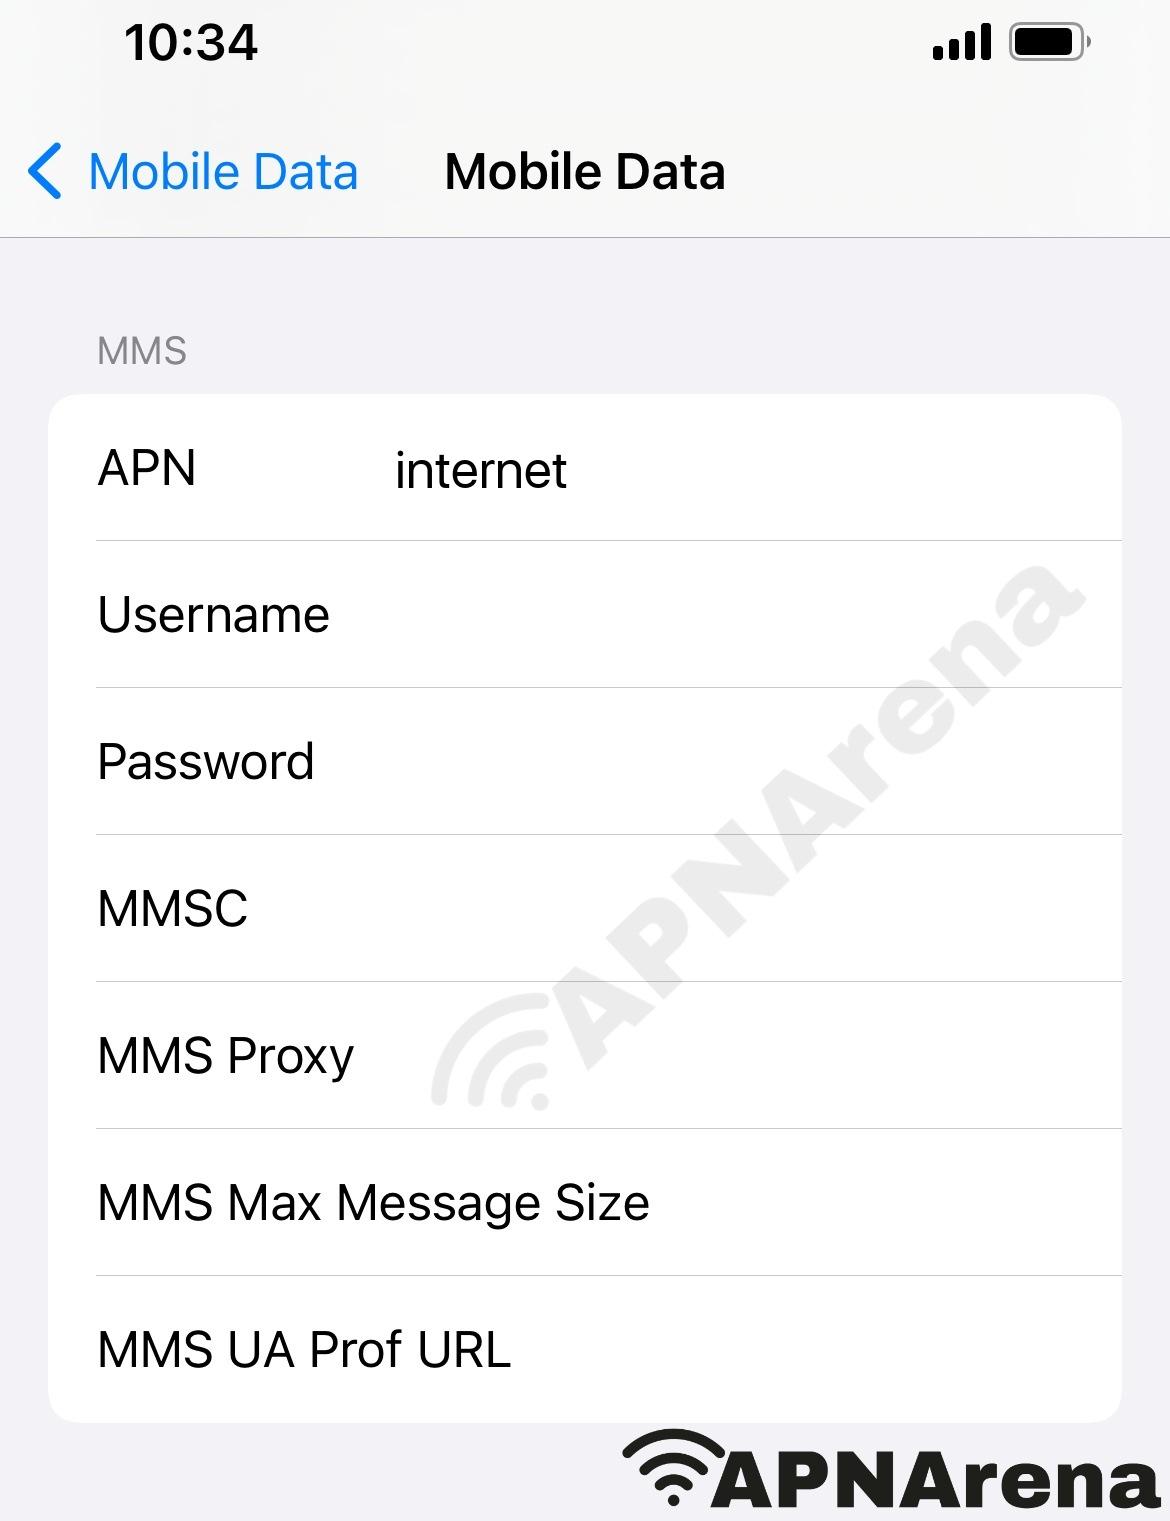 A1 Belarus (velcom) MMS Settings for iPhone